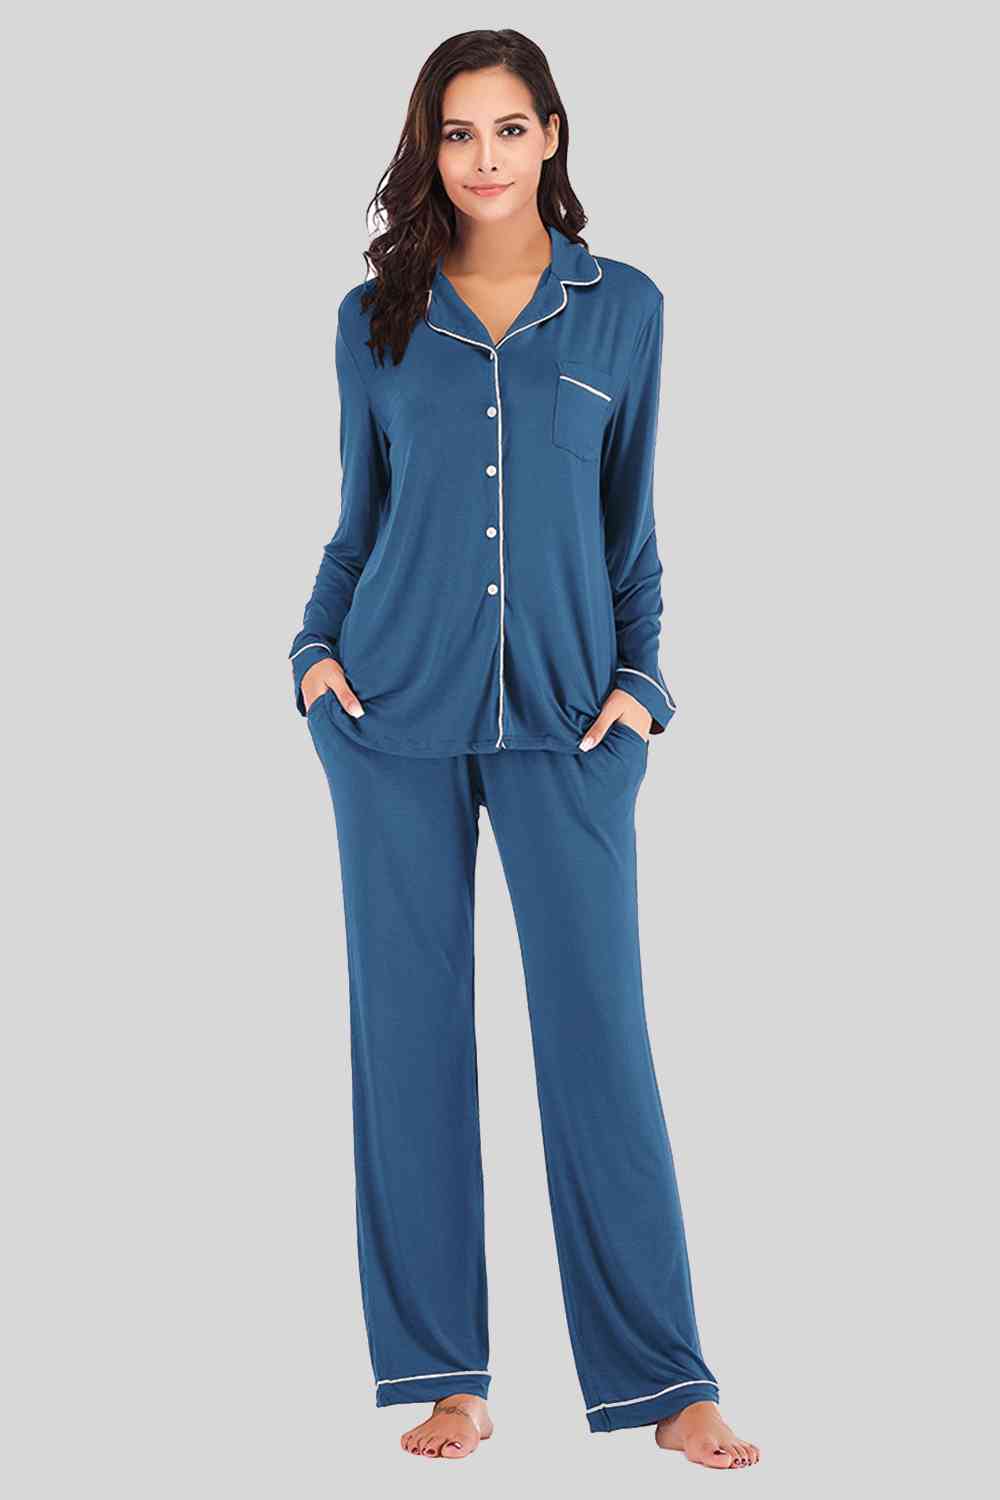 Collared Neck Long Sleeve Loungewear Set with Pockets (9 Colors) Loungewear Krazy Heart Designs Boutique Peacock  Blue S 